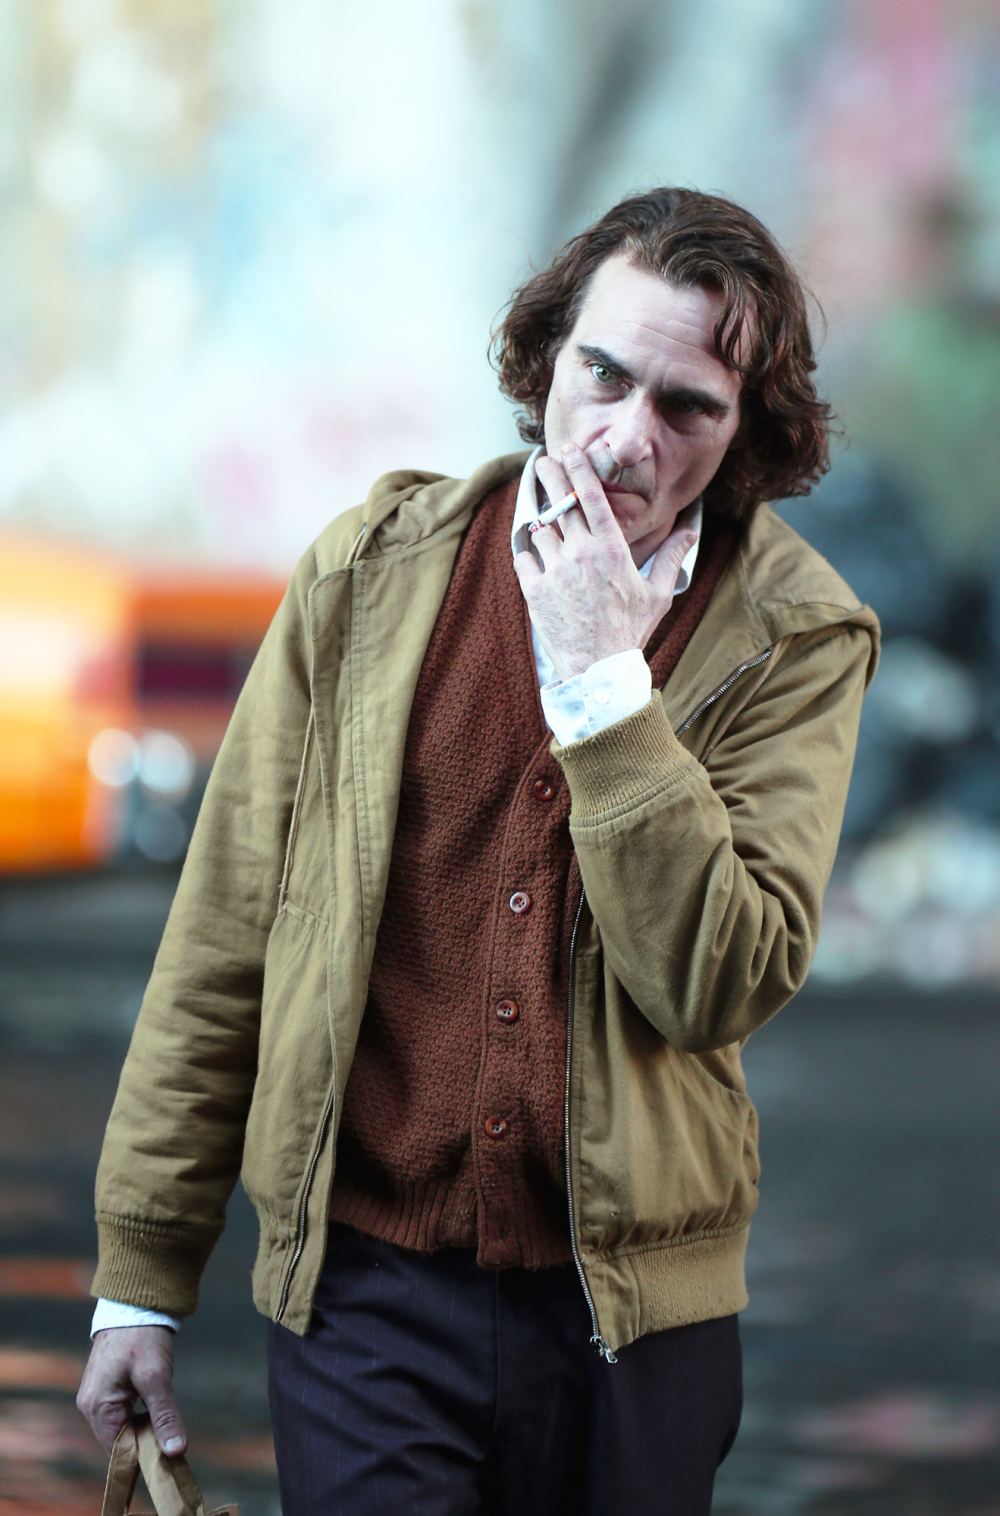 Joaquin Phoenix Transforms Into The Joker in First Footage With Creepy Makeup